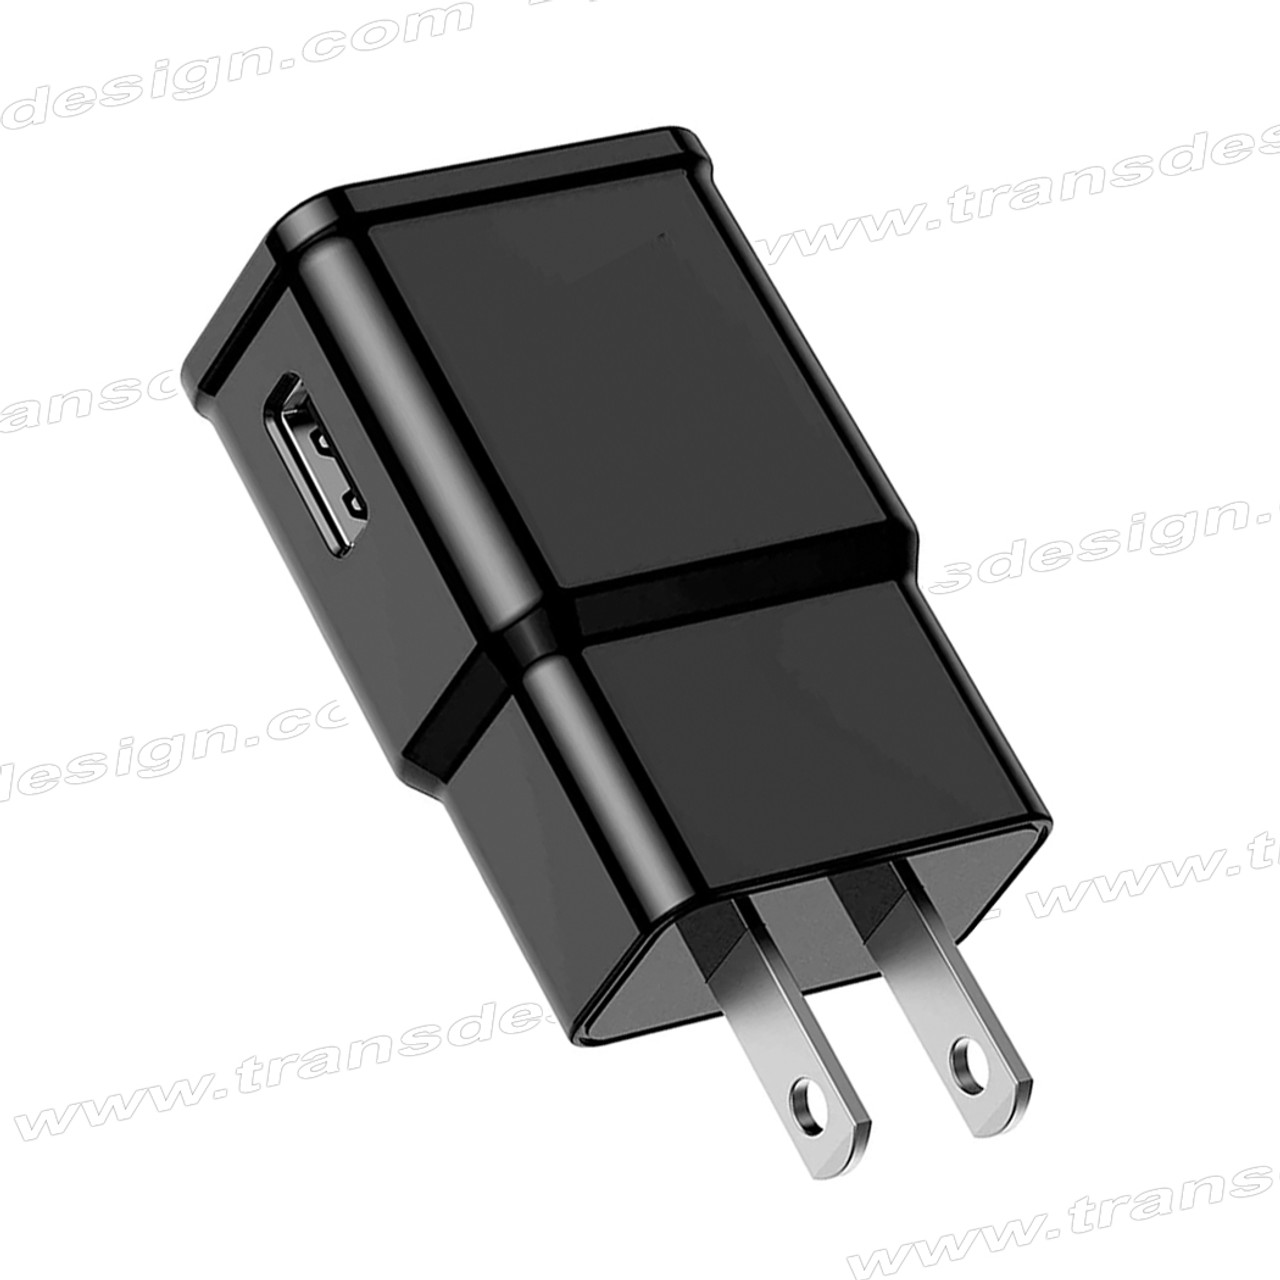 AC 100-240V to 5V 2A USB Power Supply Adaptor Converter Embedded Connector  Charger 